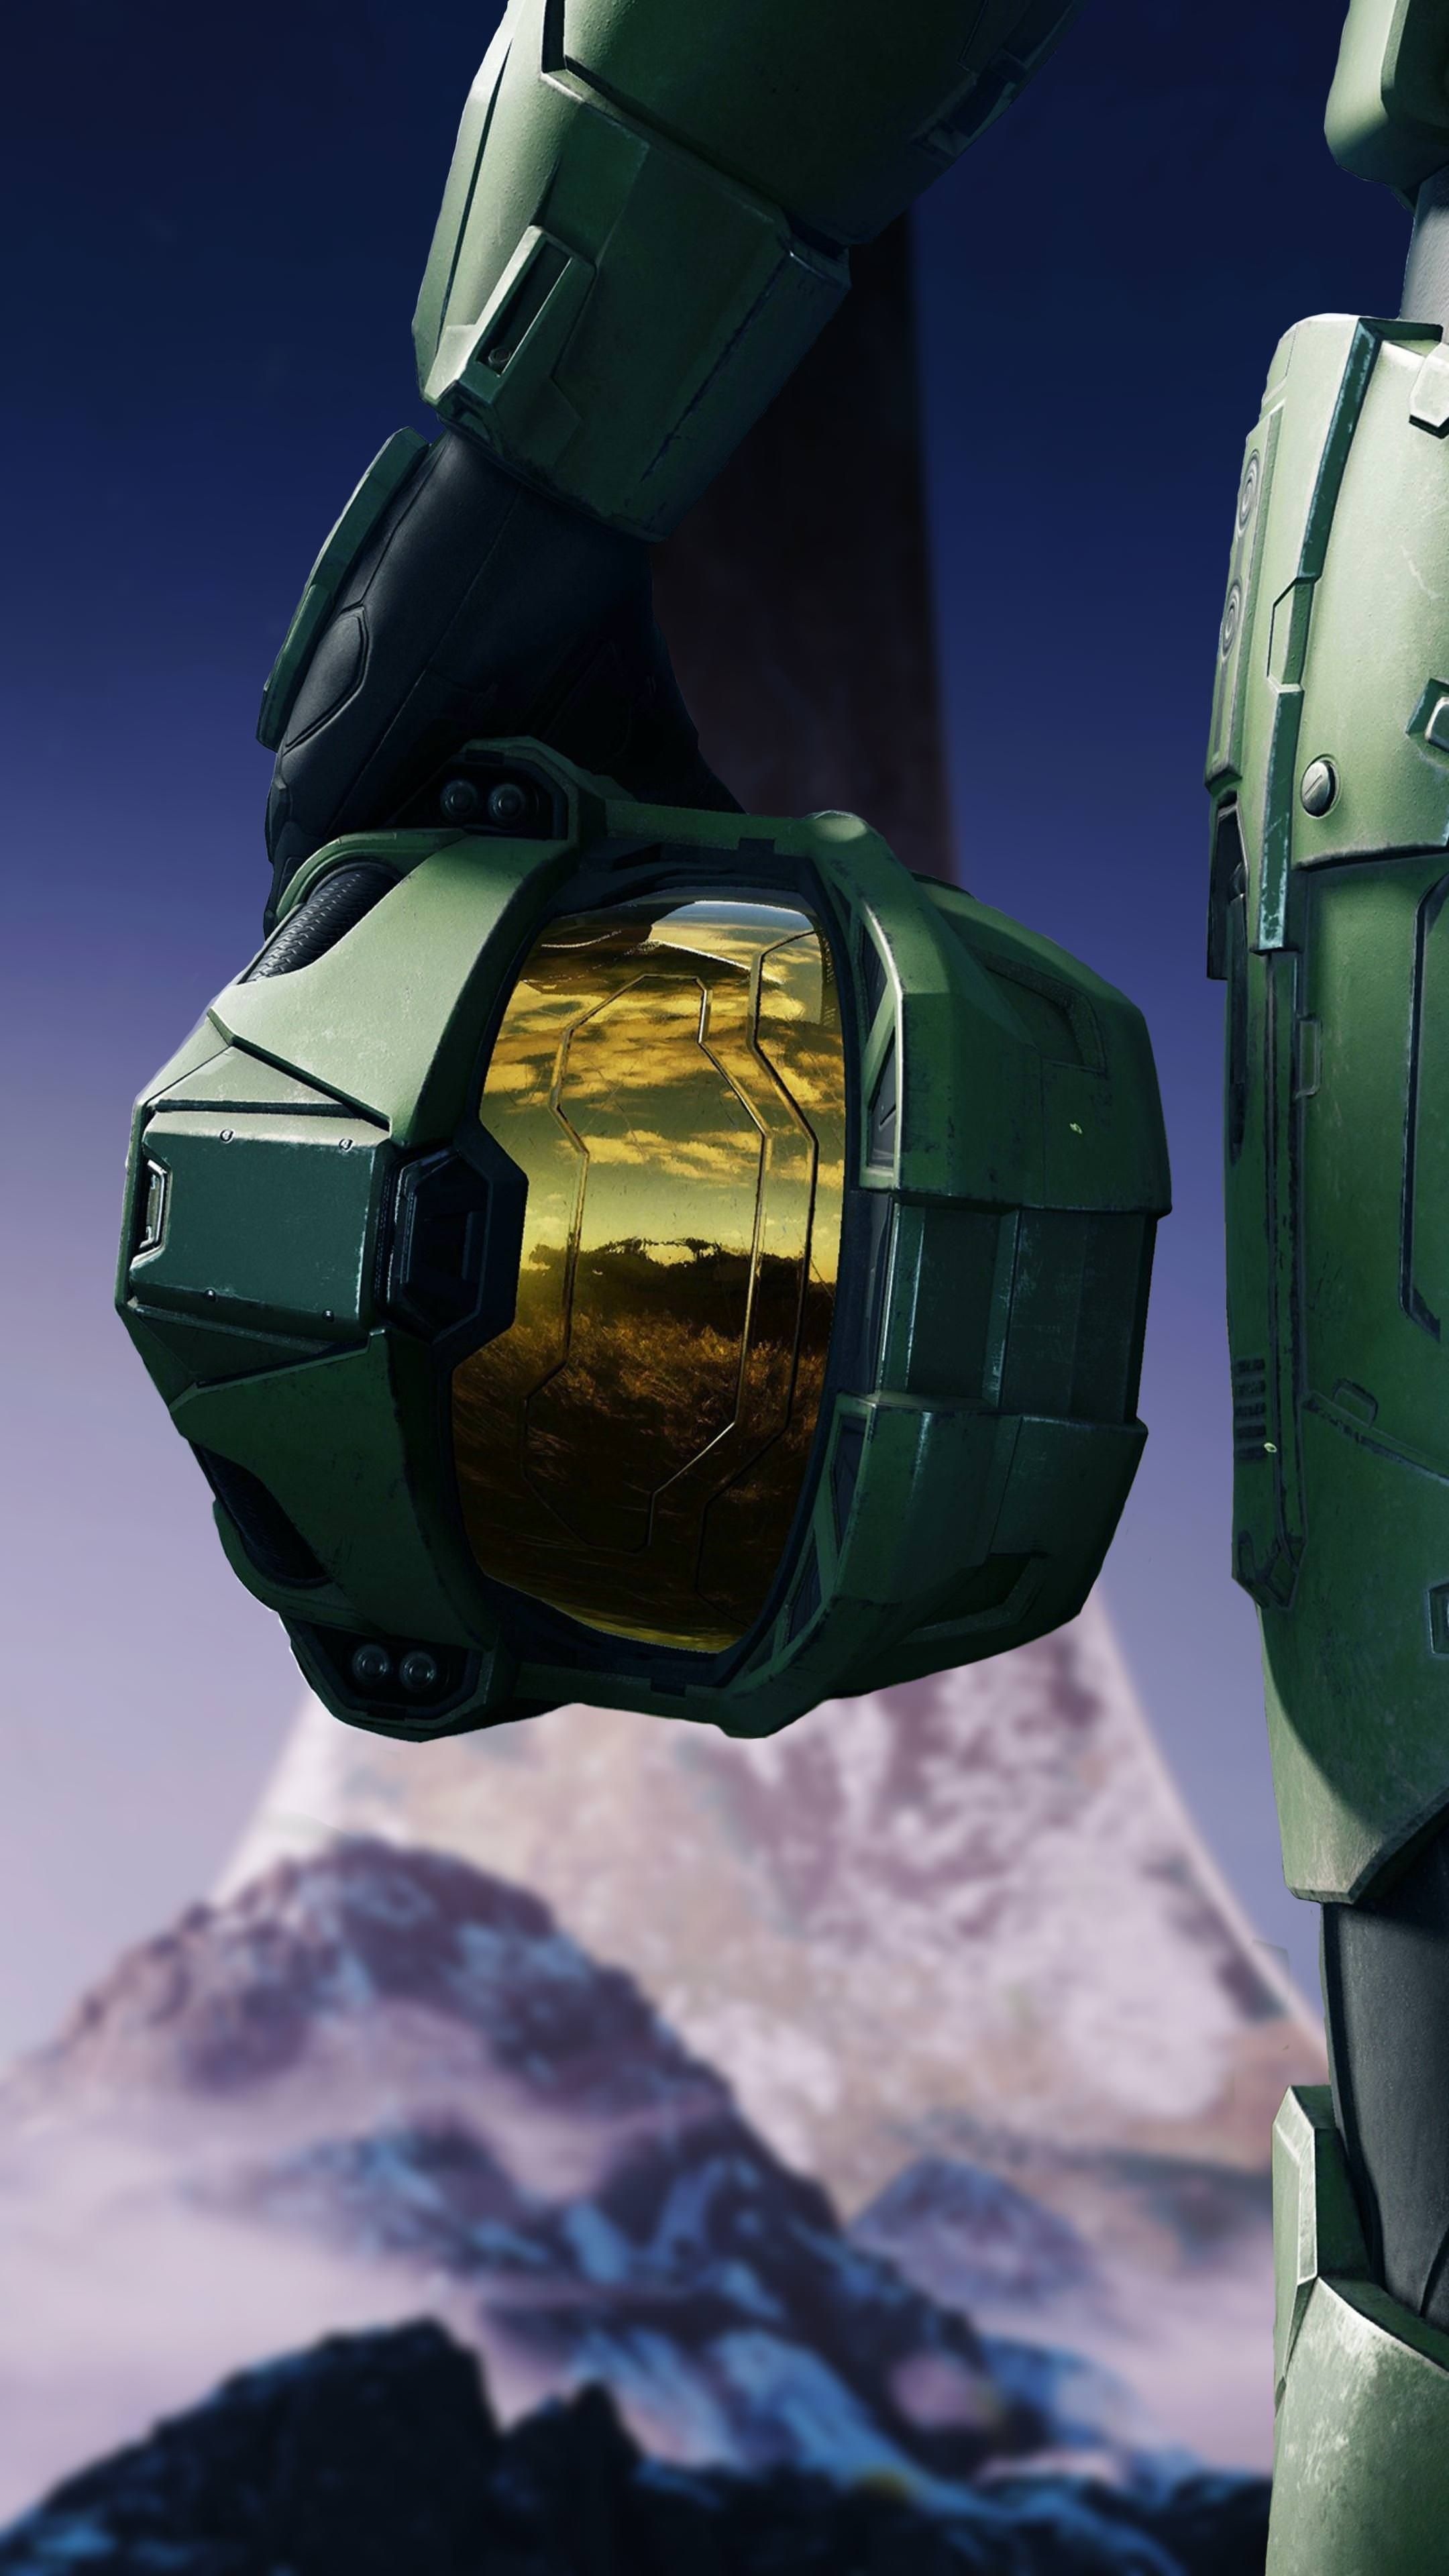 Halo (TV Series): Infinite, A 2021 first-person shooter game. 2160x3840 4K Background.